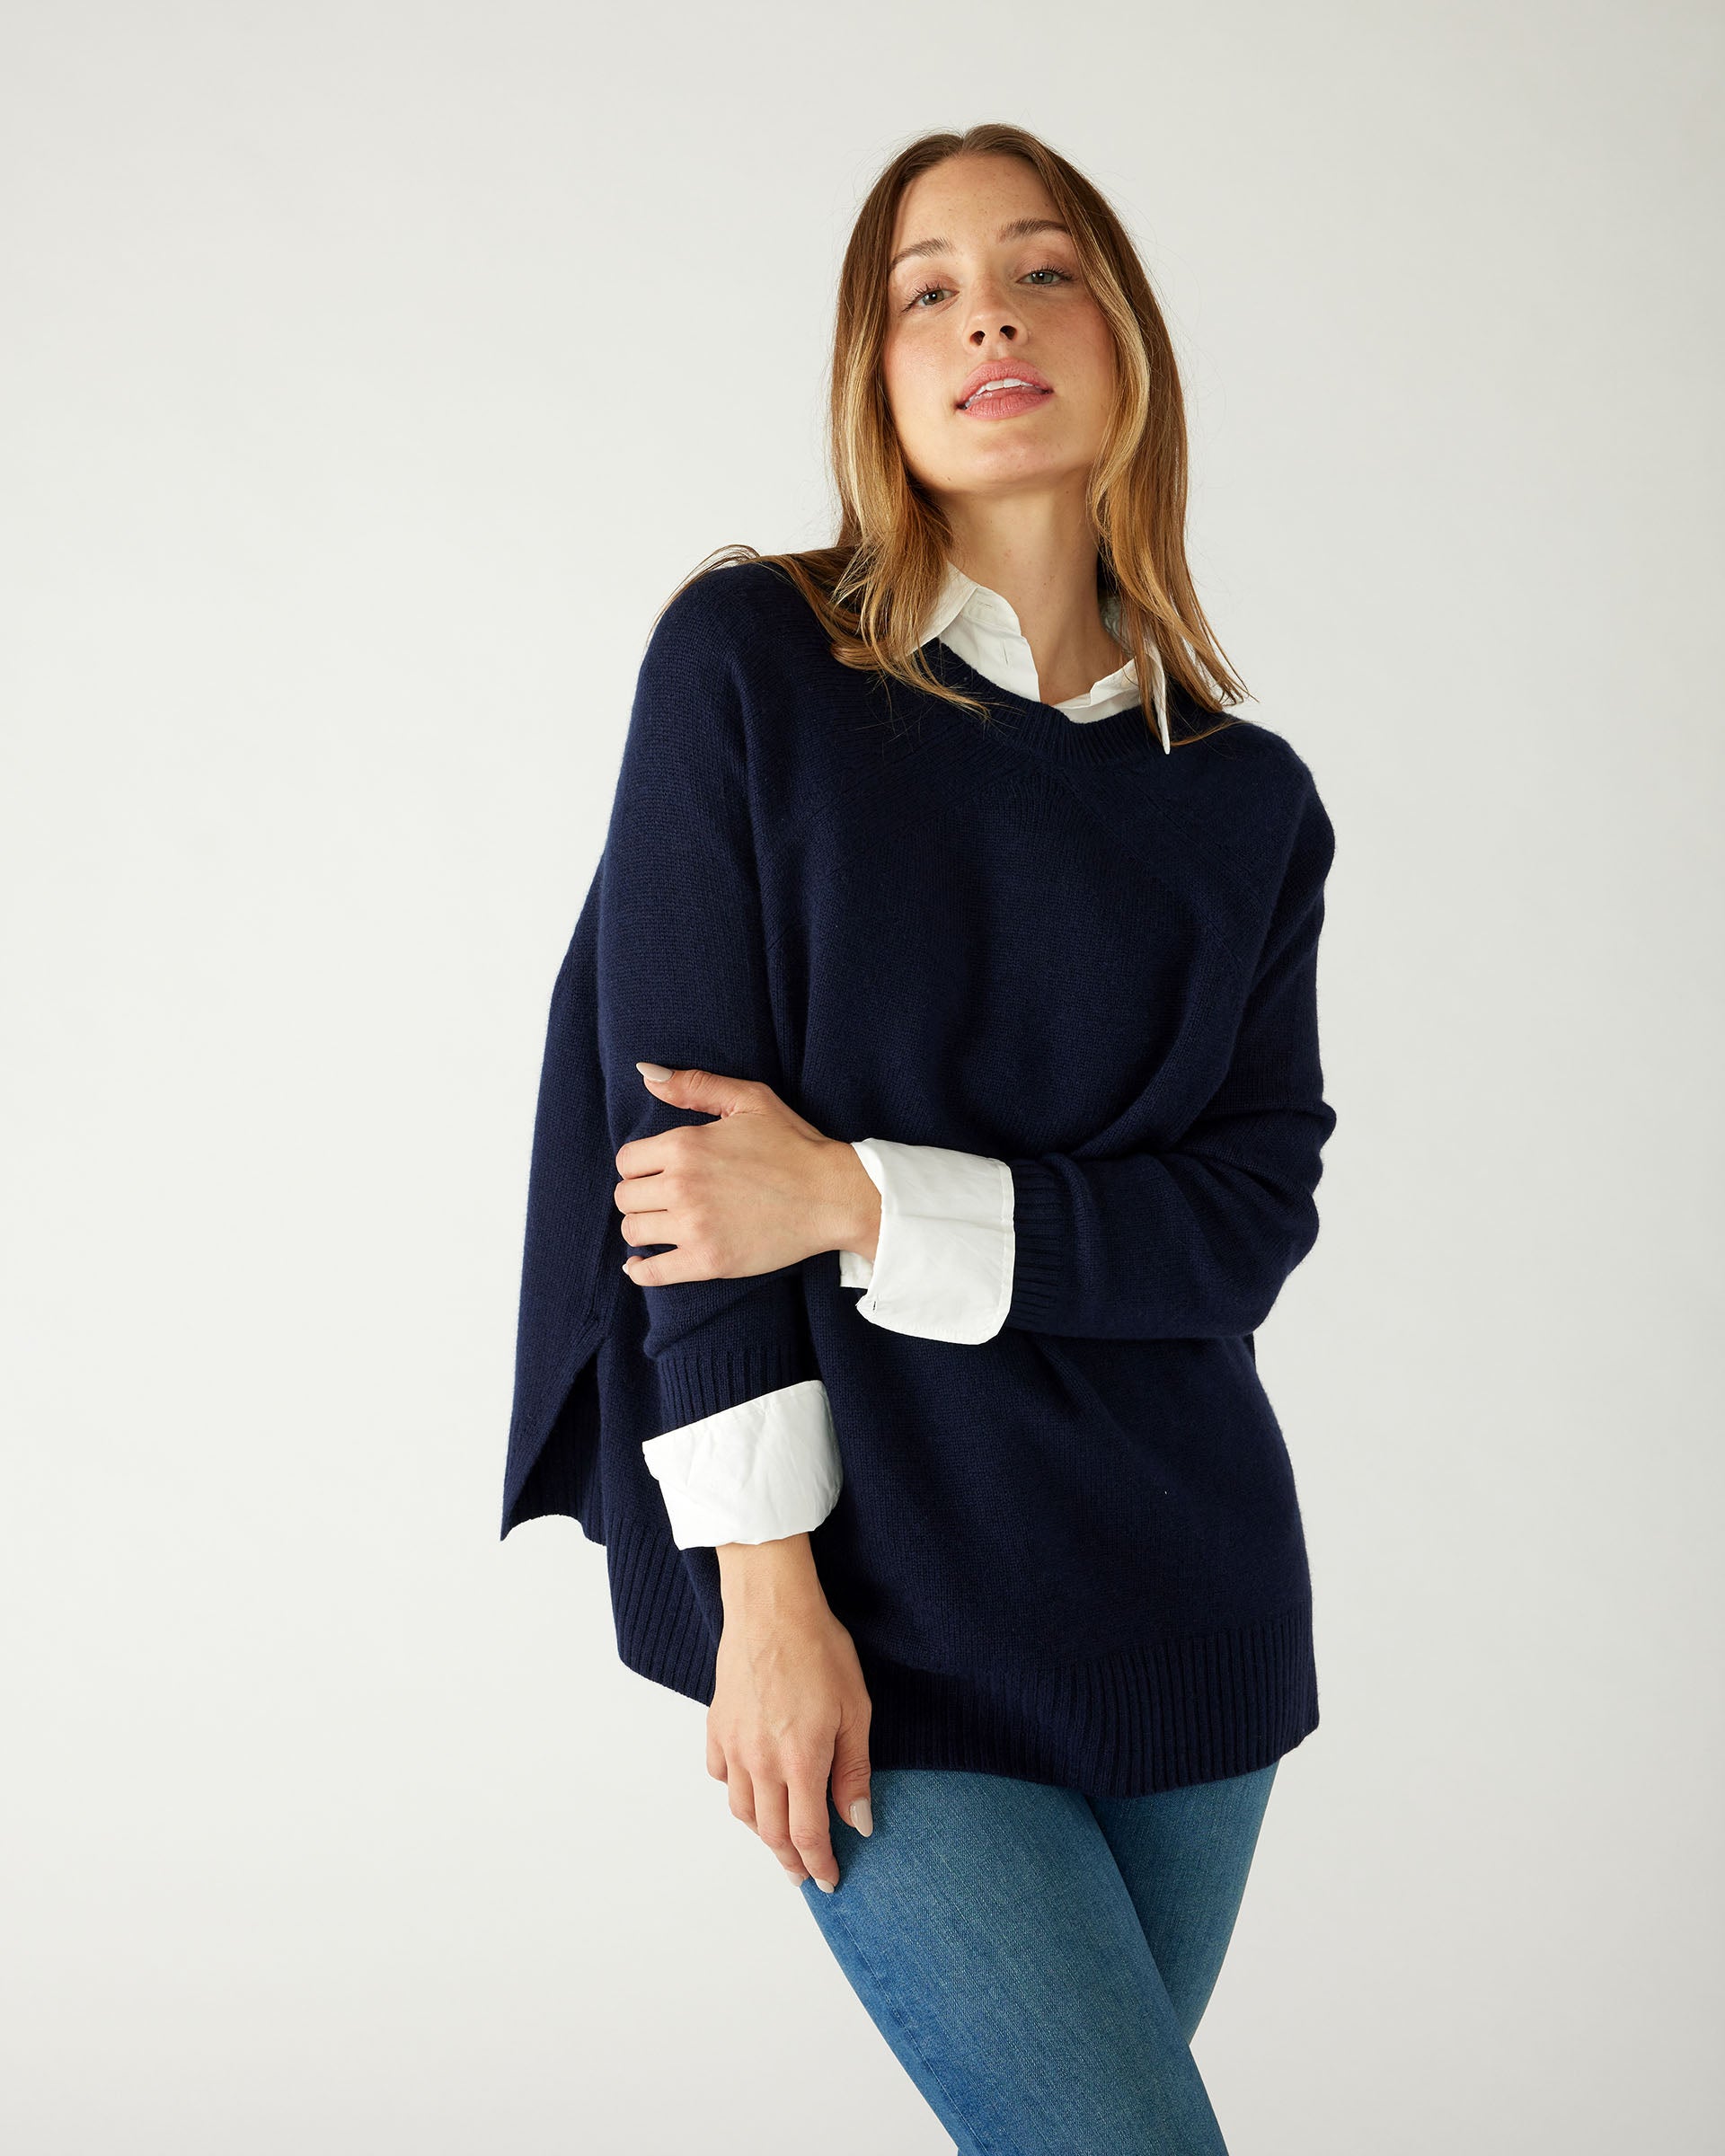 woman wearing mersea banff sweater in navy holding arm